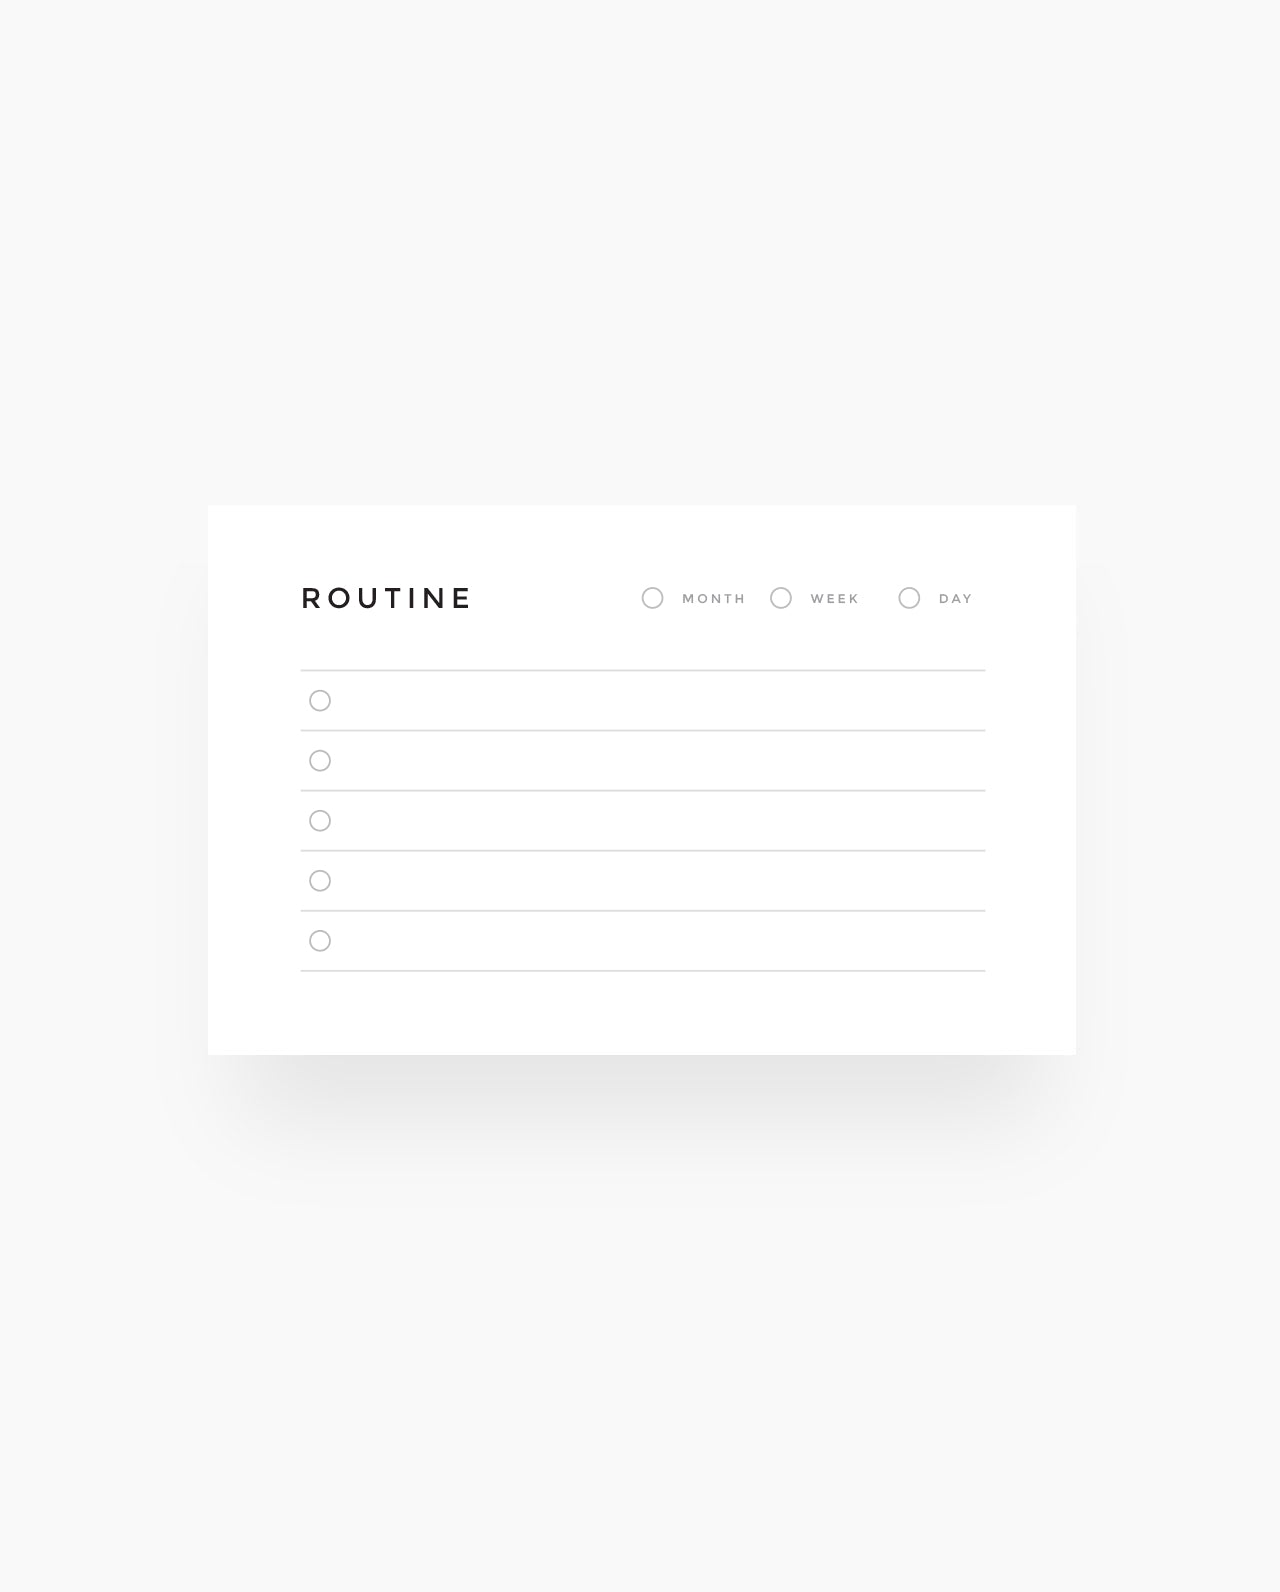 WC004 - Routine -  Wallet Cards